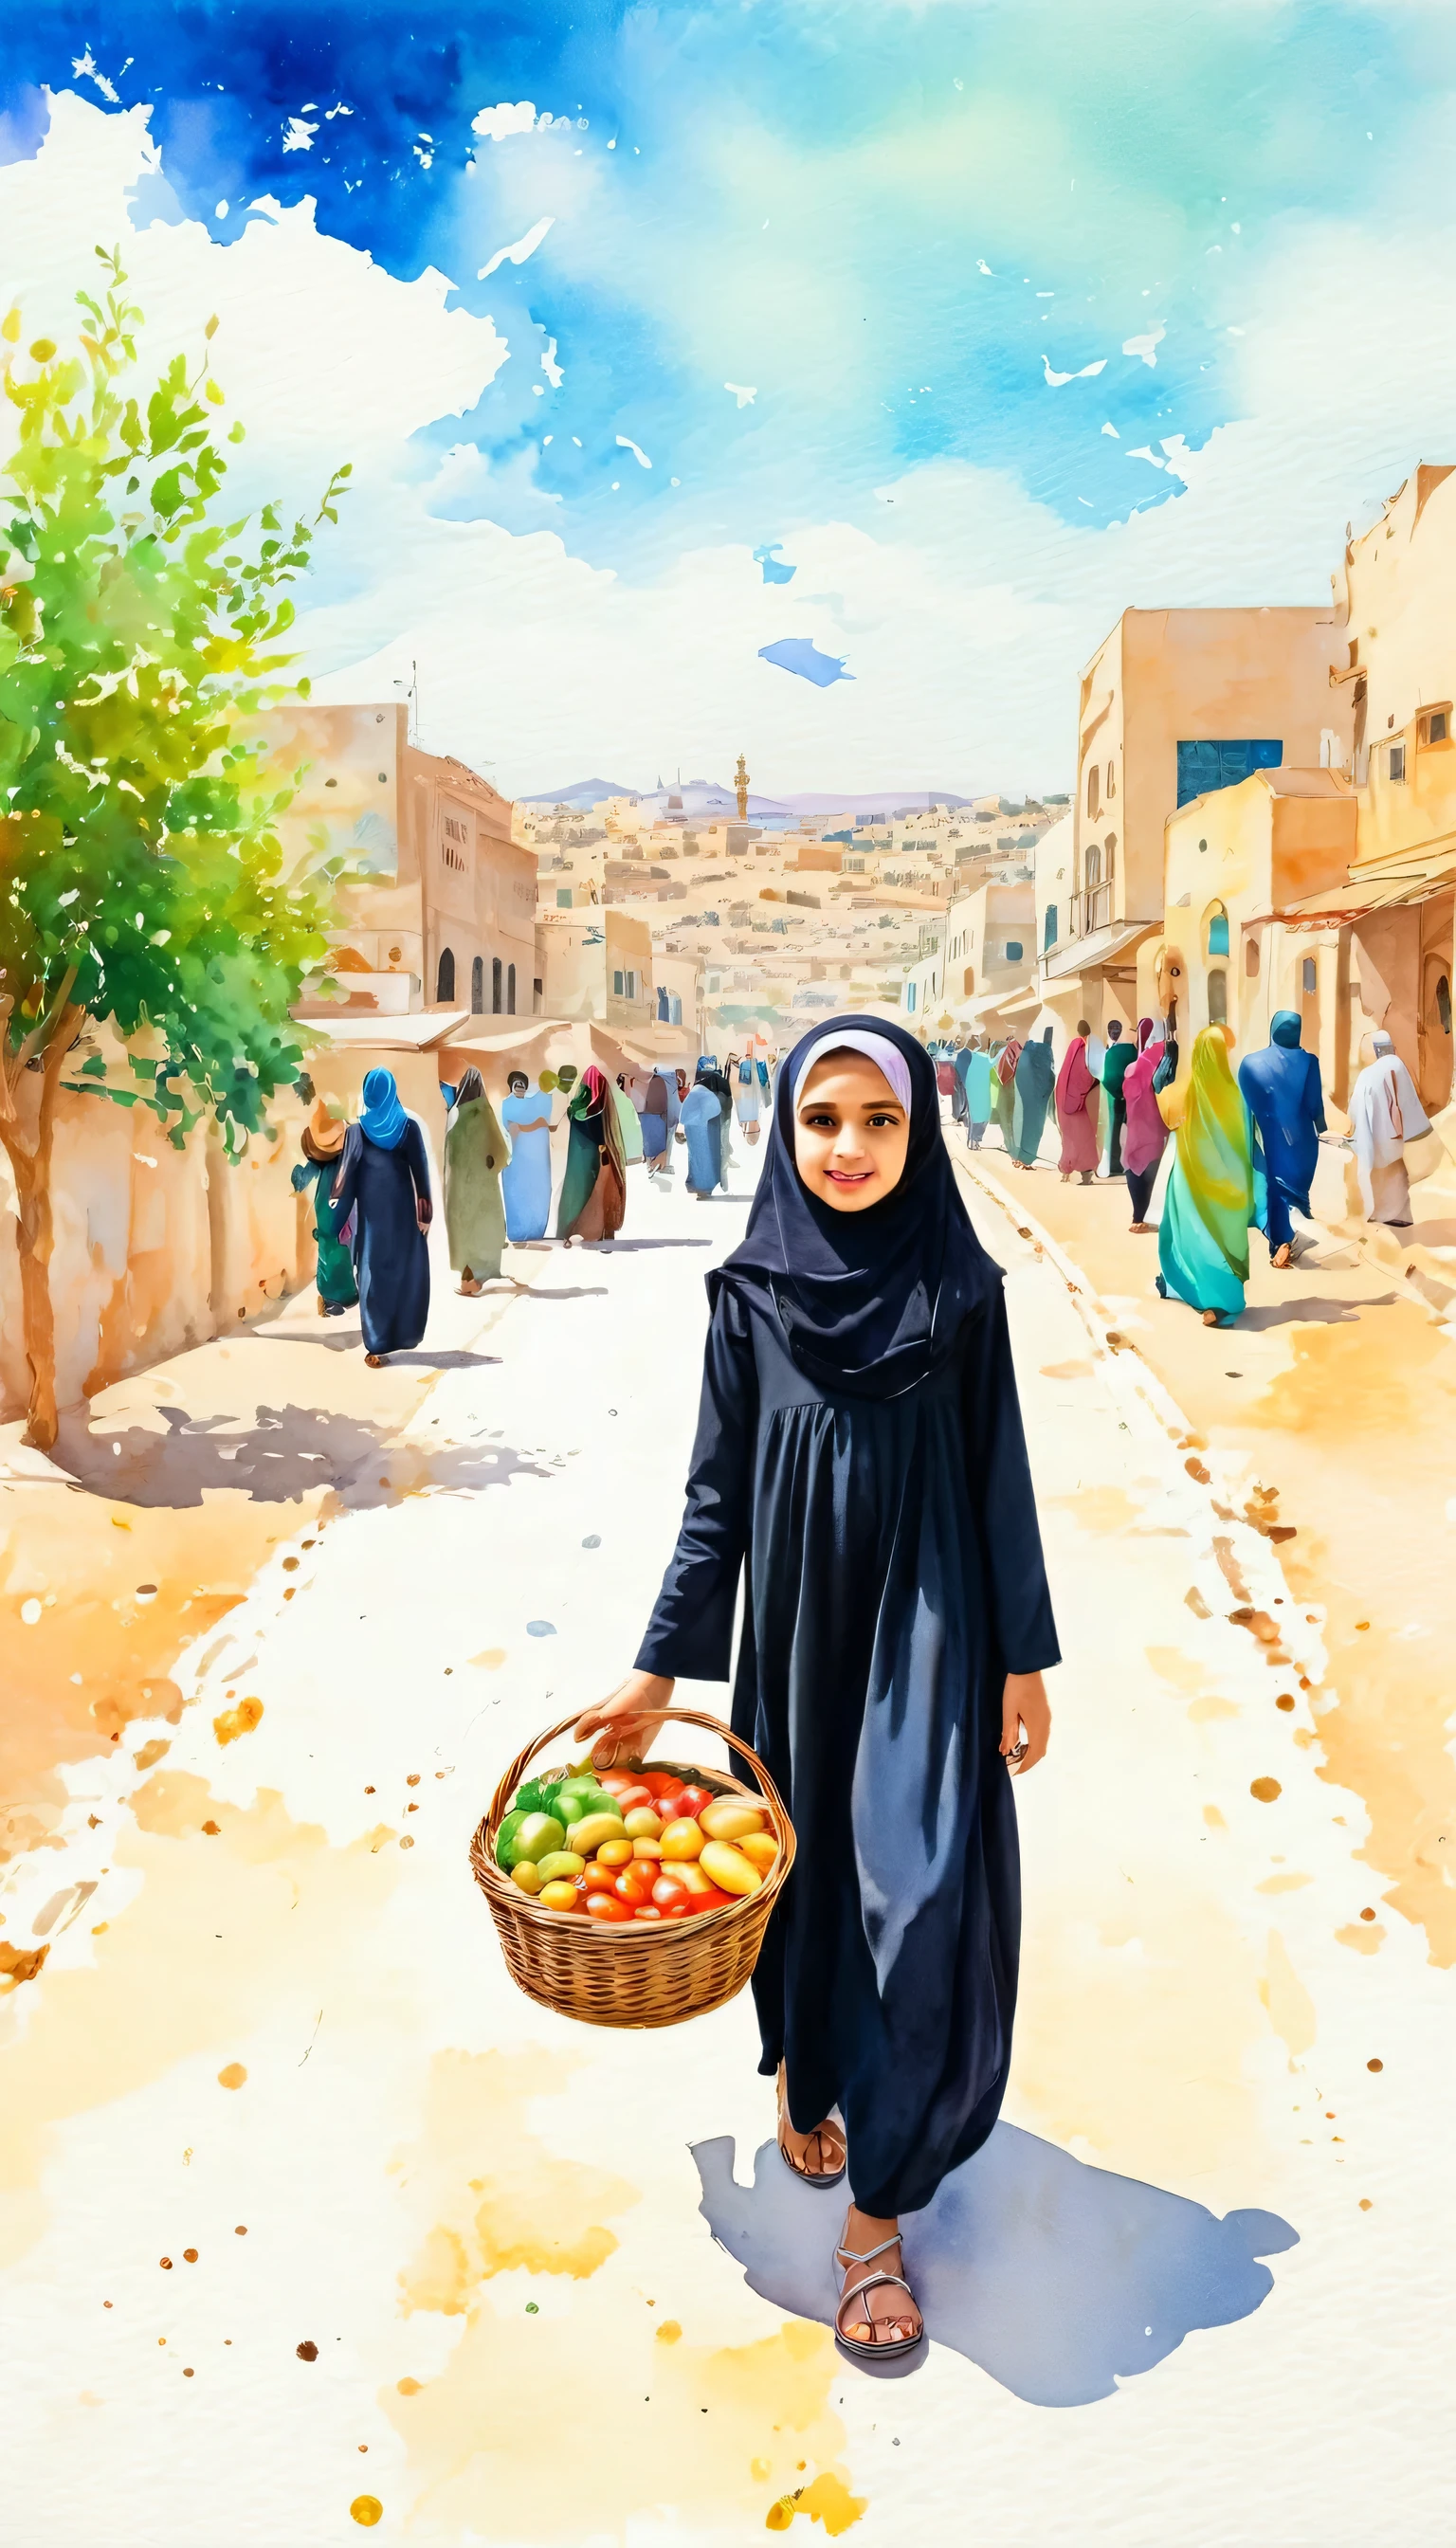 6years old Arab girl wearing a black dress and hijab walking outdoors, crowd, religious festivity, holding, holding basket, food, offering food, background includes a road, sky, day, looking_at_viewer, modern art, painting, drawing, watercolor, psychedelic colors